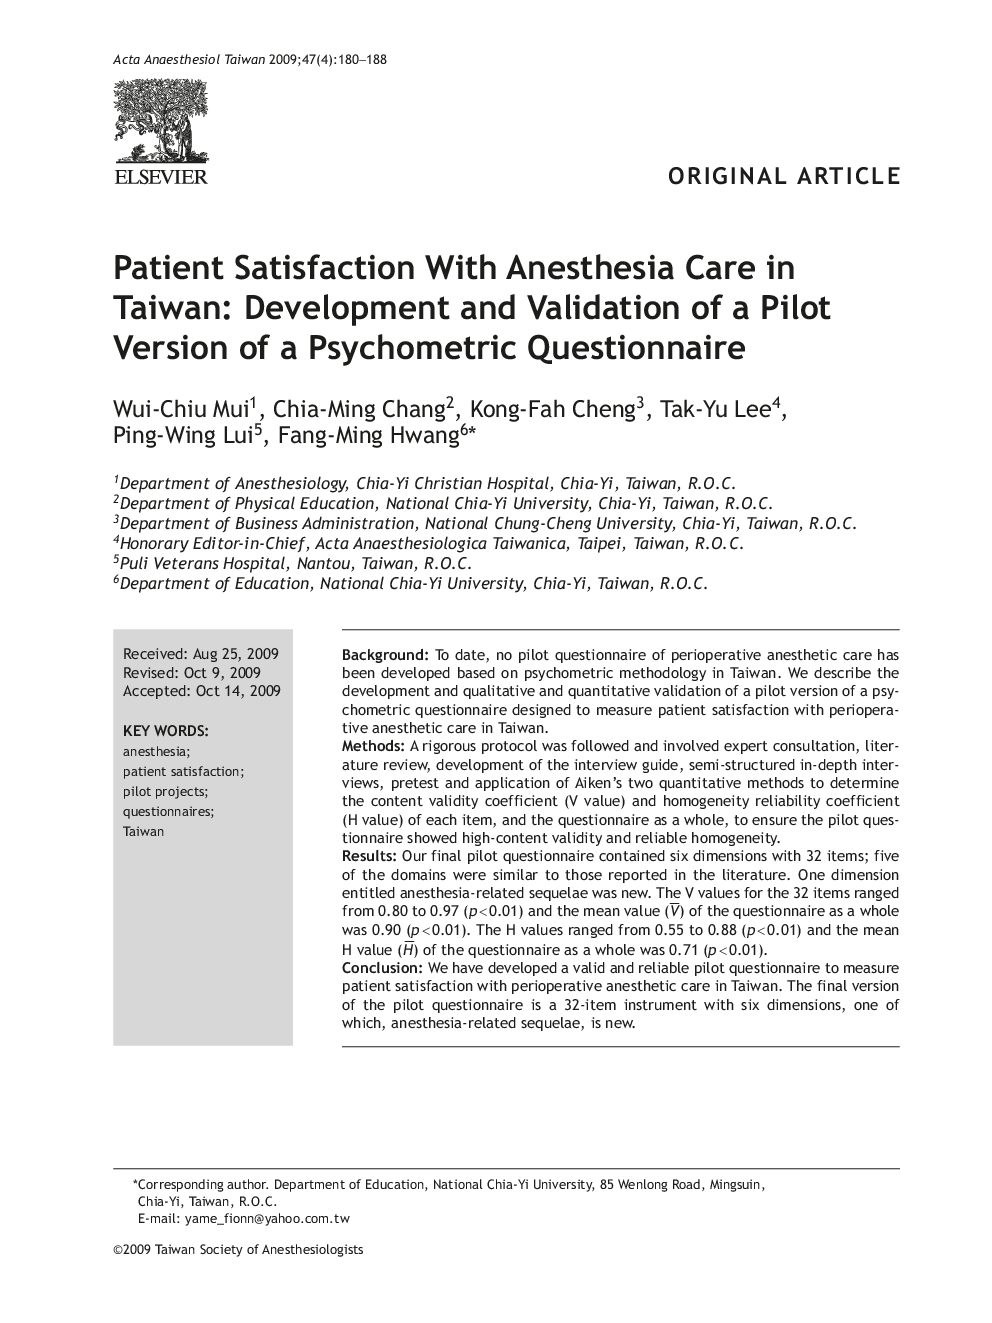 Patient Satisfaction With Anesthesia Care in Taiwan: Development and Validation of a Pilot Version of a Psychometric Questionnaire